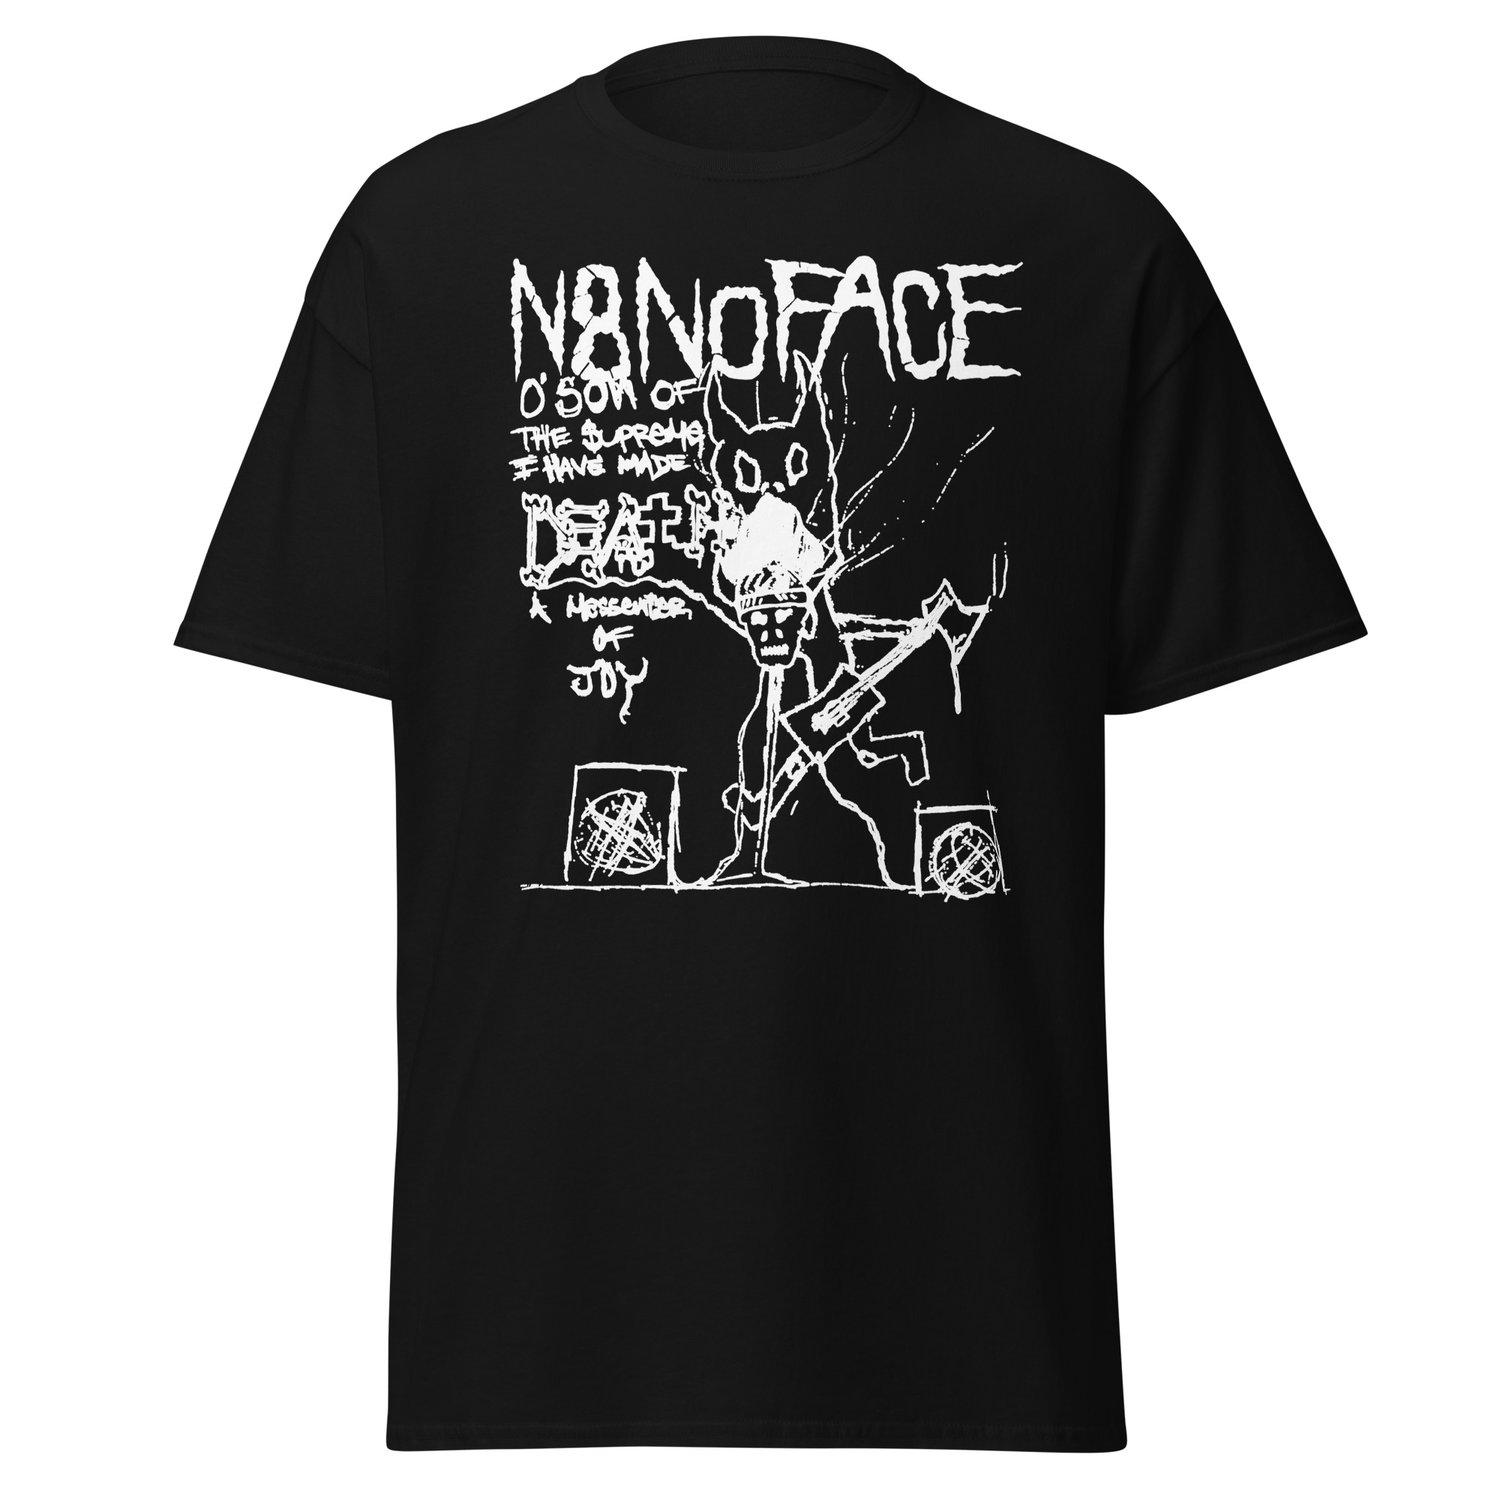 Death's Messenger by N8NOFACE Men's classic tee (Royal, Black, Red, Navy)